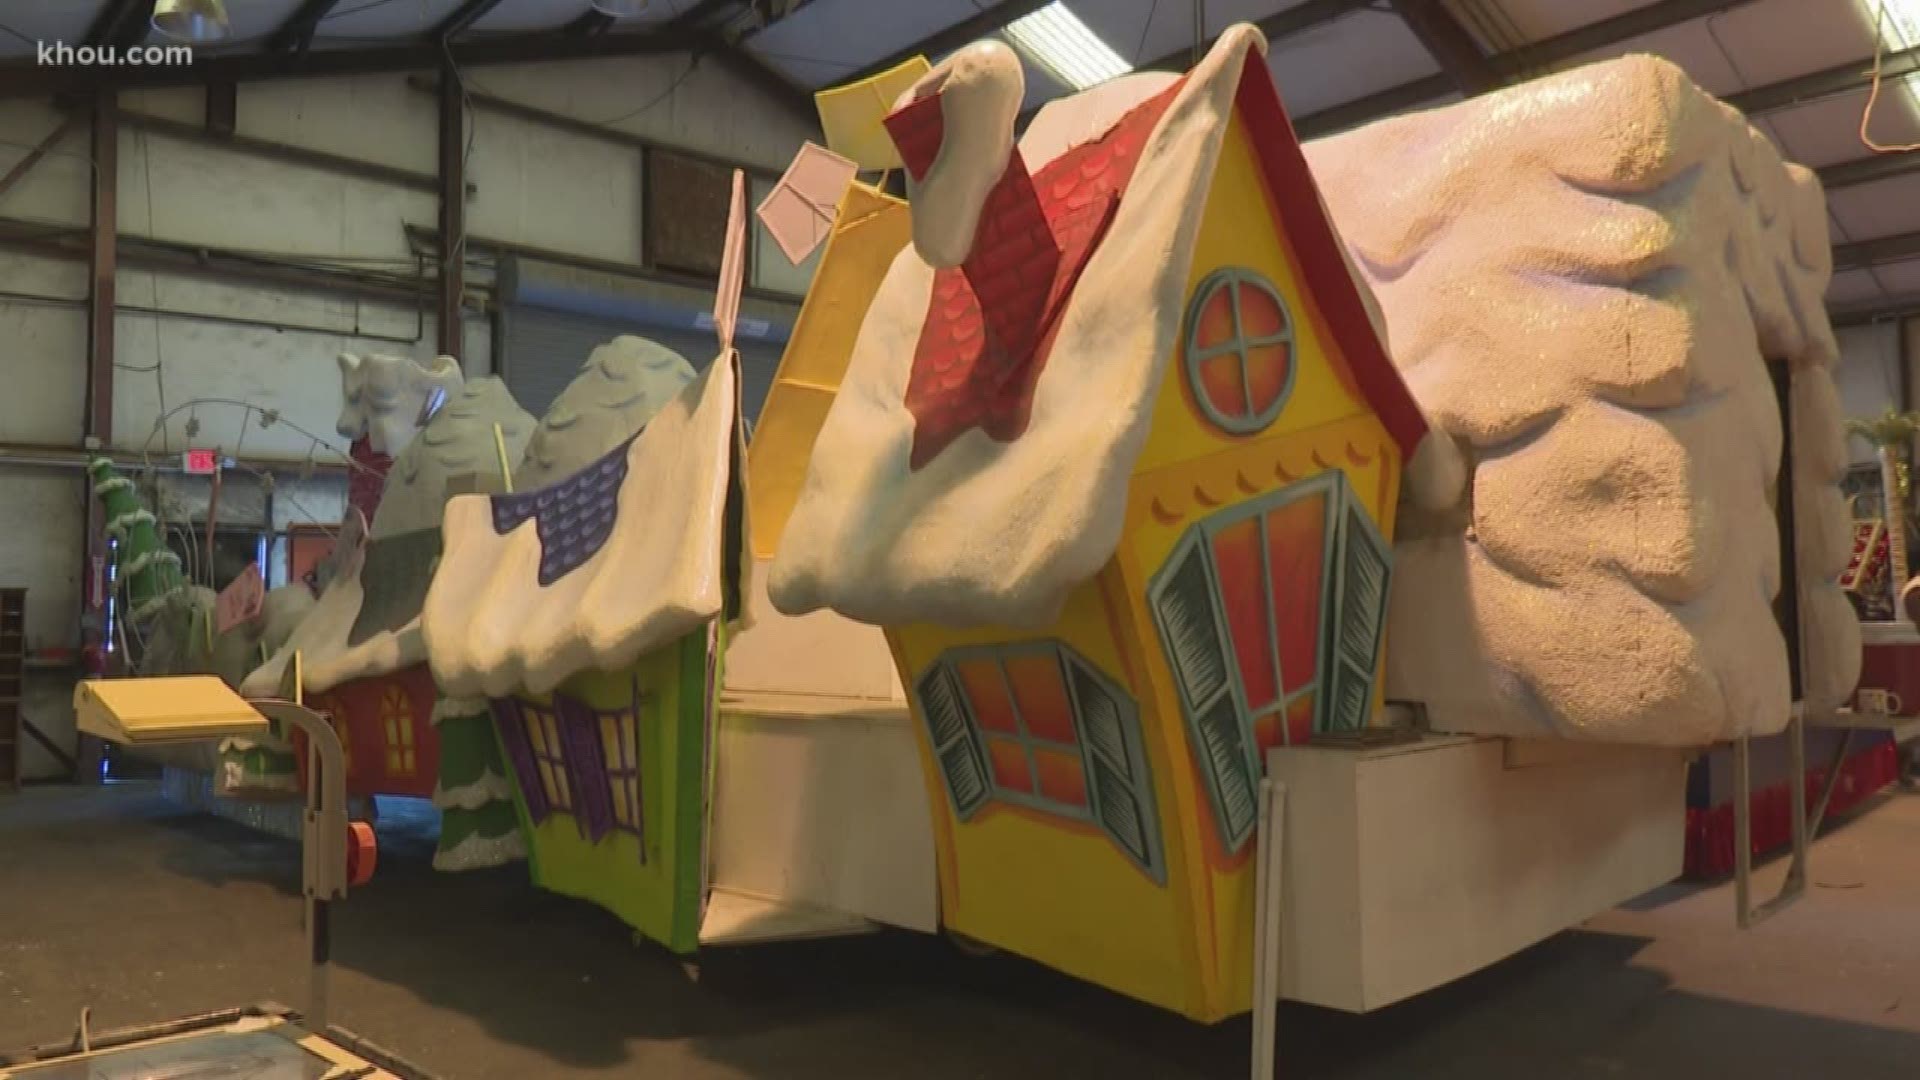 KHOU 11 reporter Adam Bennett gives us a sneak peek at the floats to be featured in the HEB Thanksgiving Day Parade.